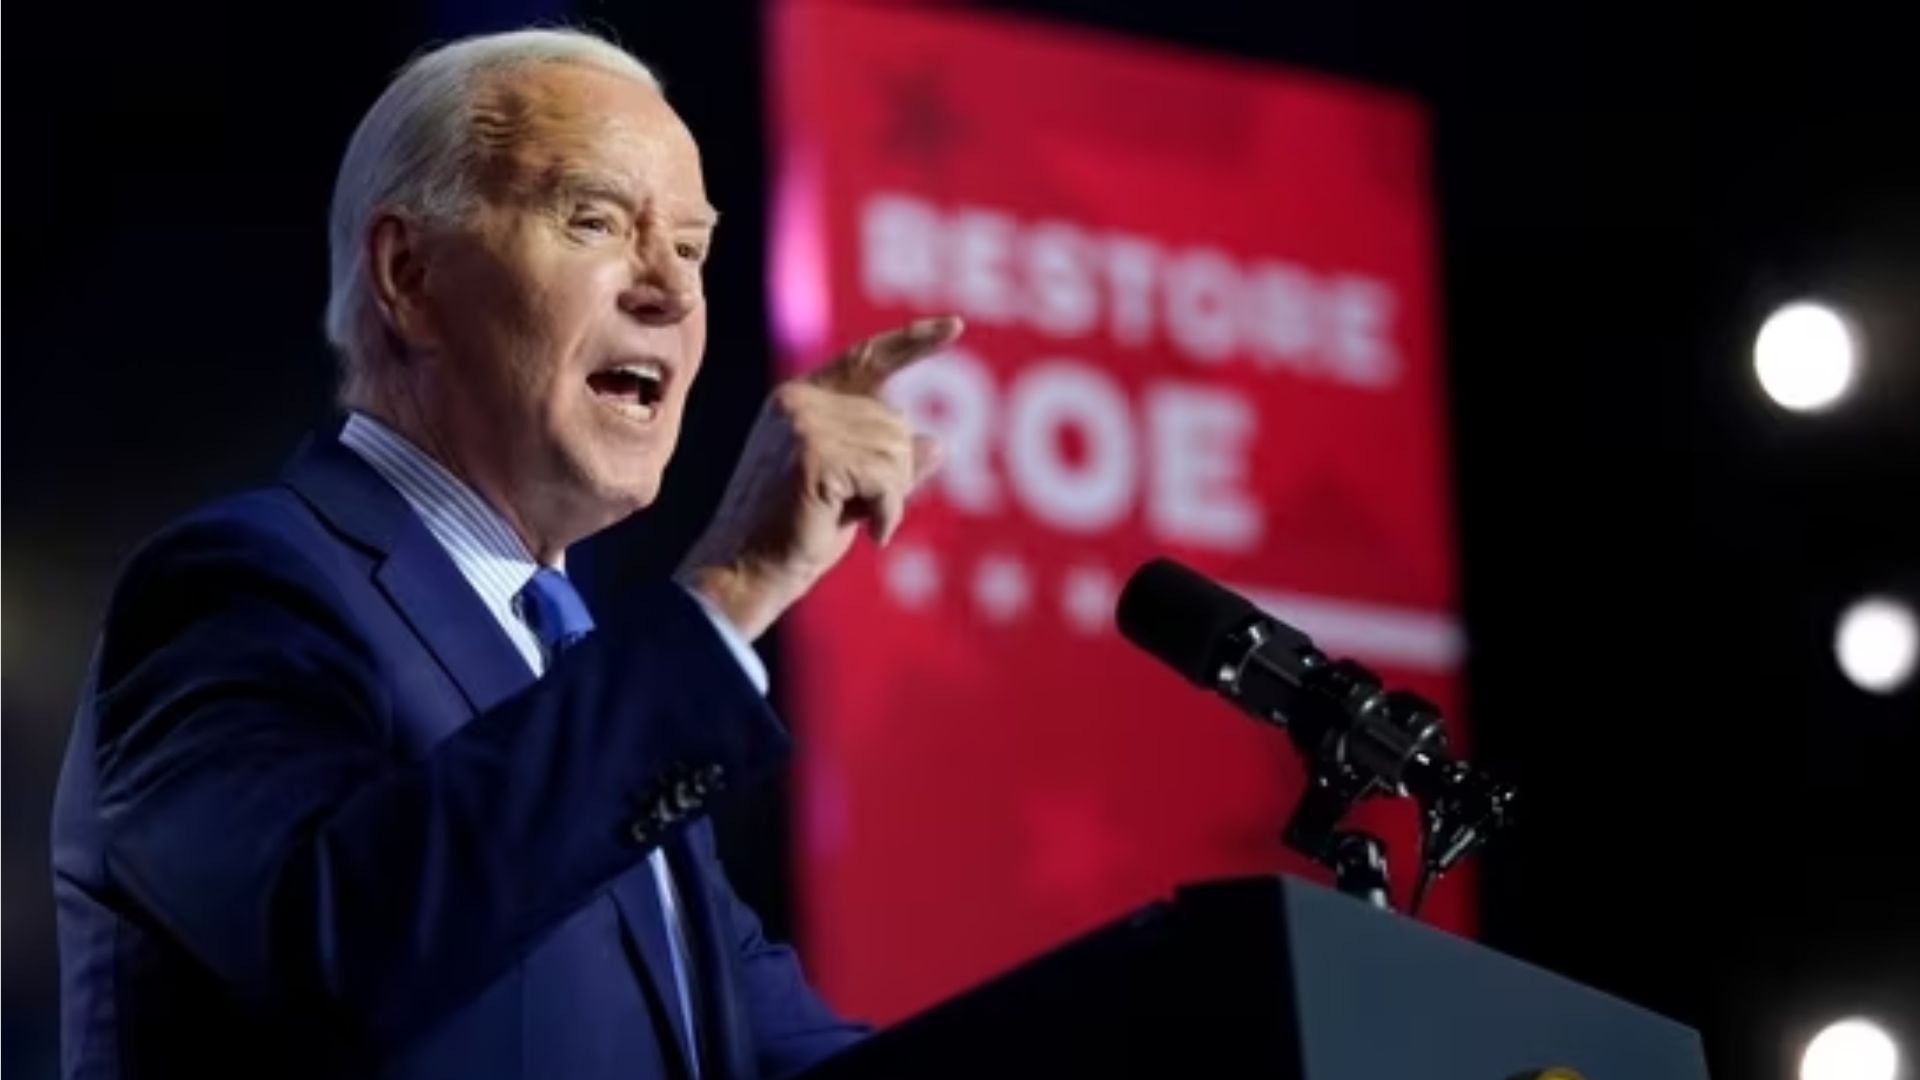 Joe Biden likely to win New Hampshire primary with successful write-in campaign